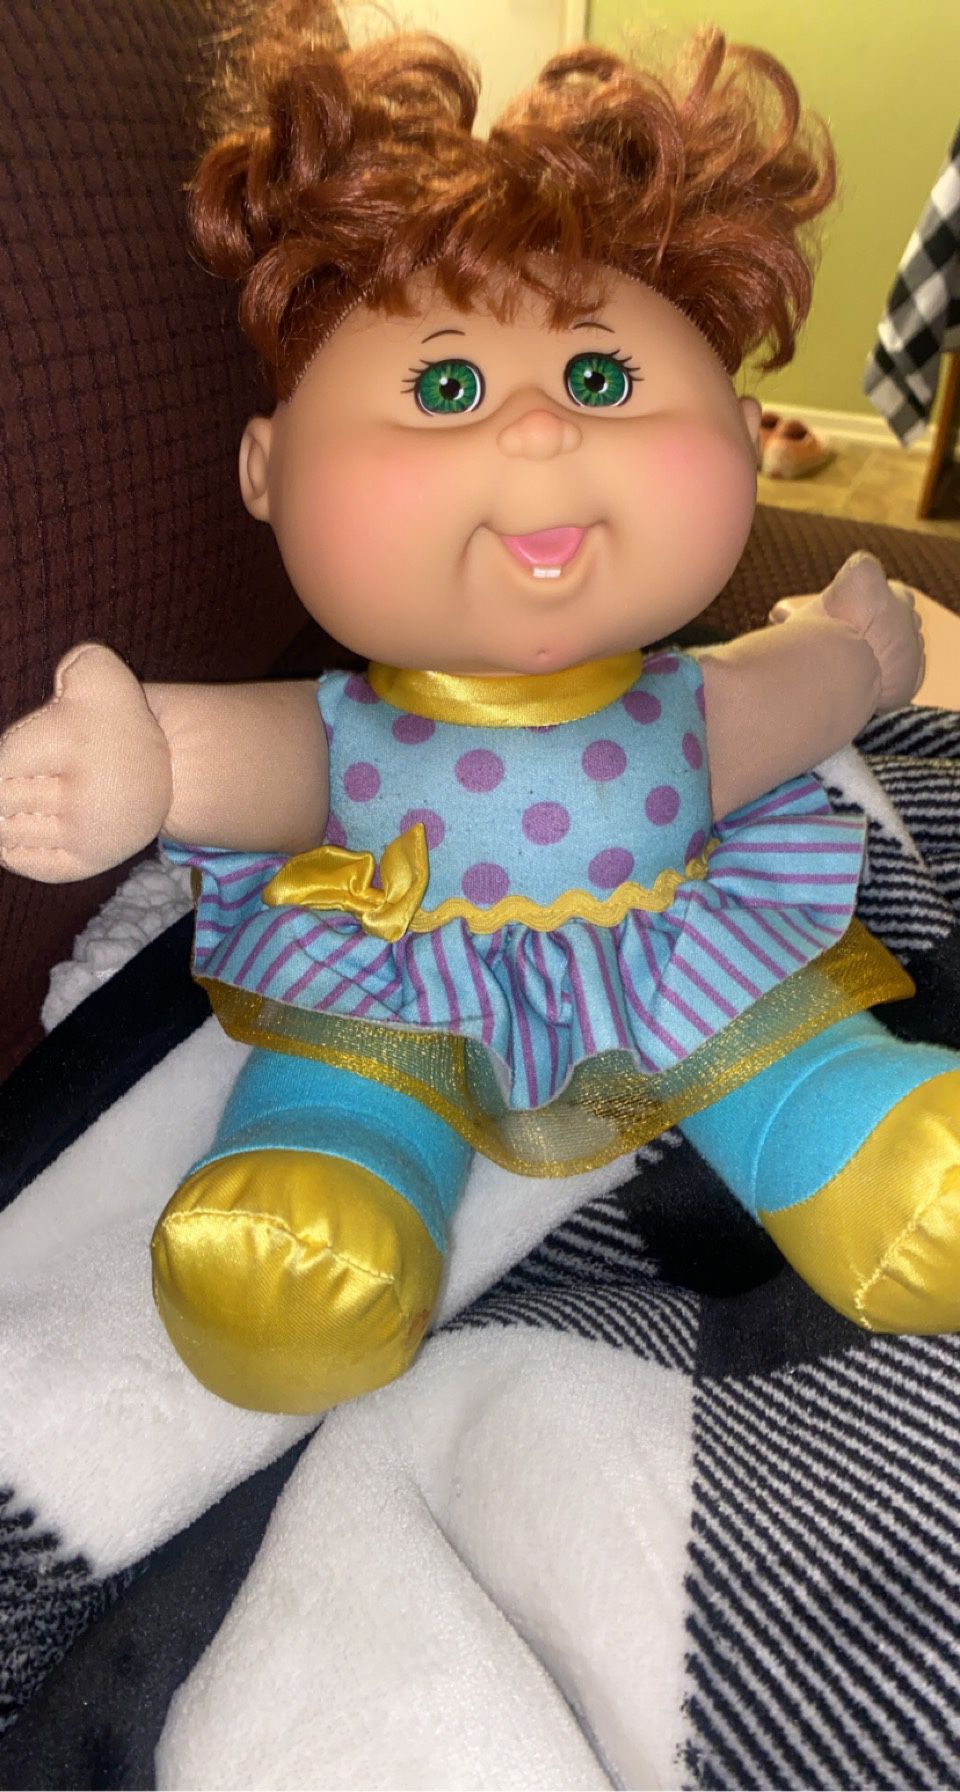 Cabbage Patch Doll  Circa 2011